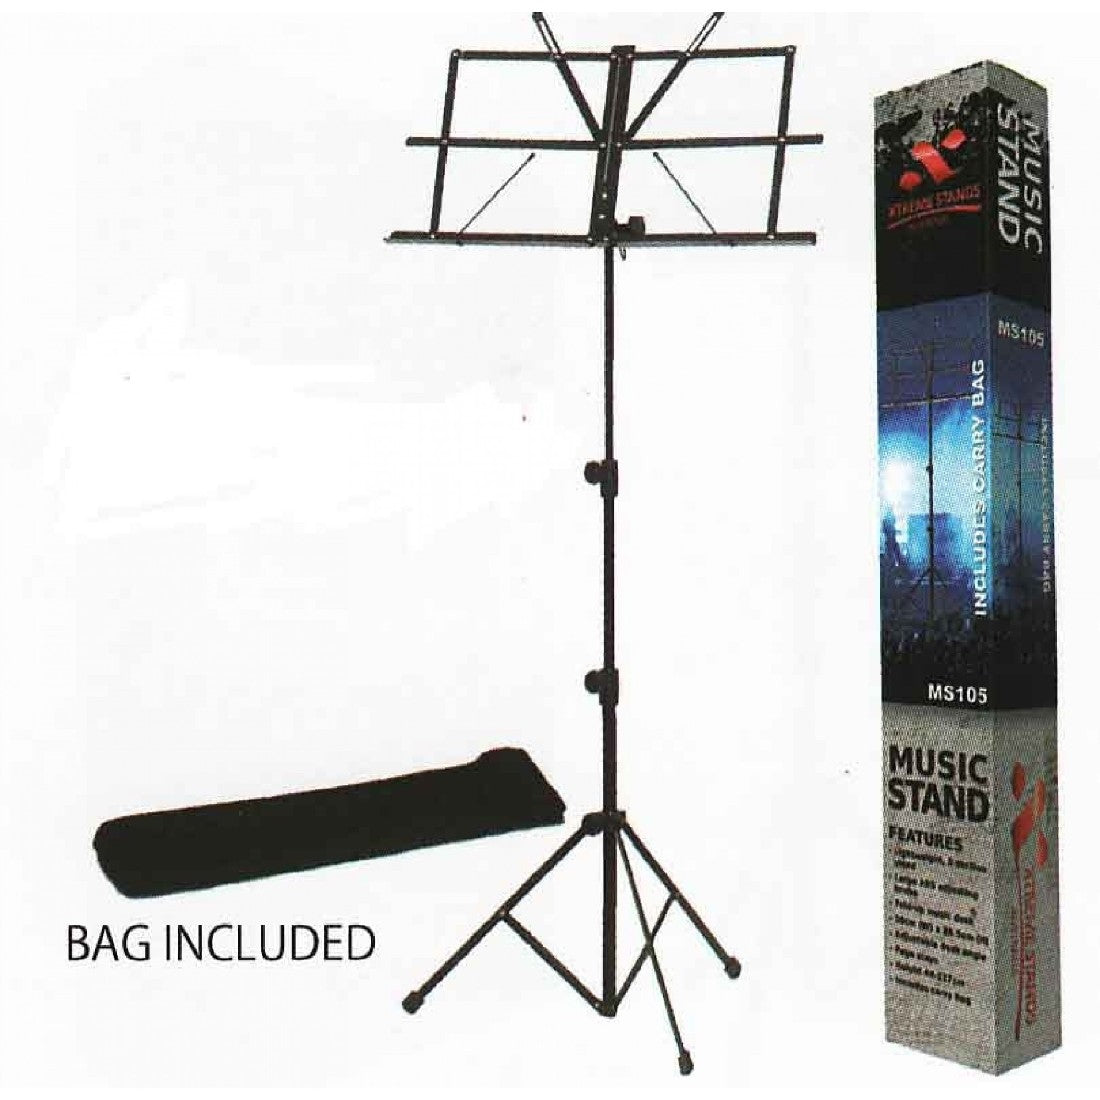 XTREME MS105 MUSIC STAND W/BAG